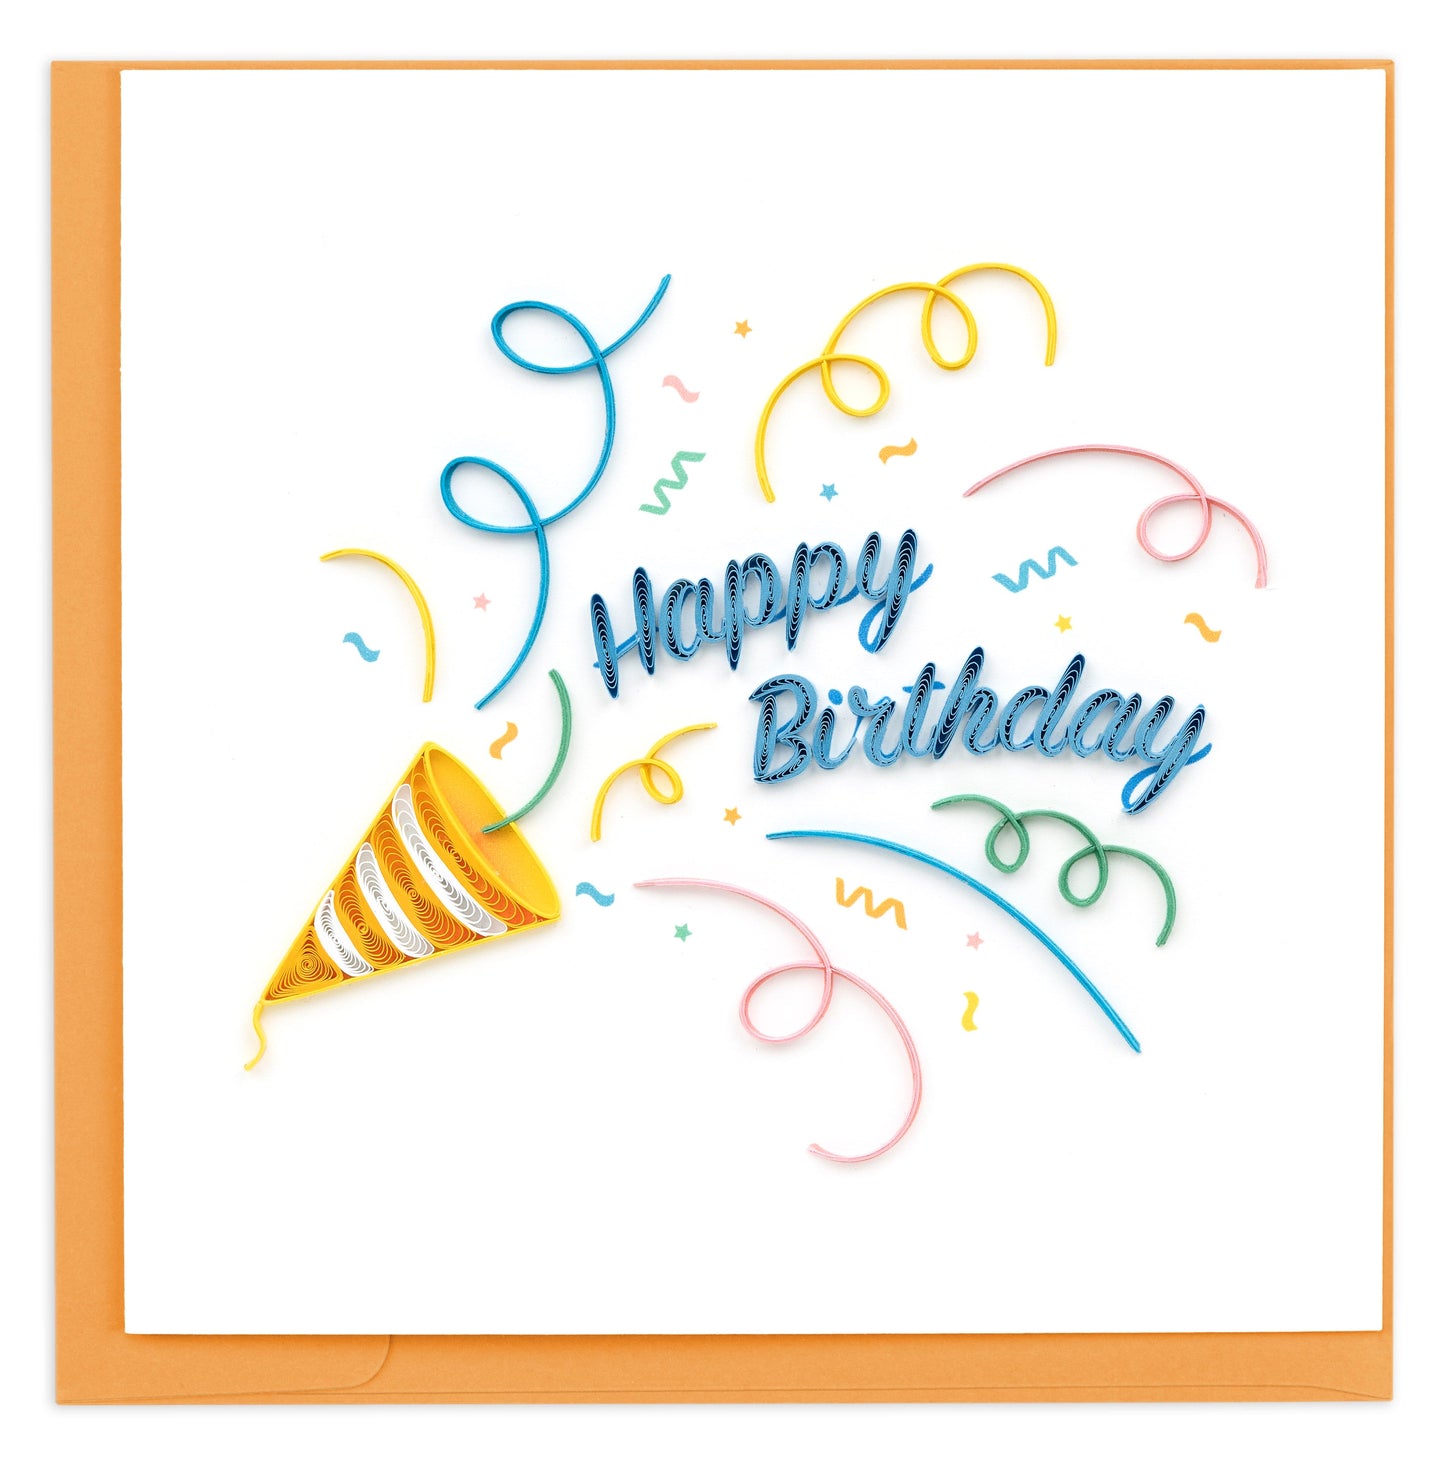 Quilled "Happy Birthday" Confetti Greeting Card